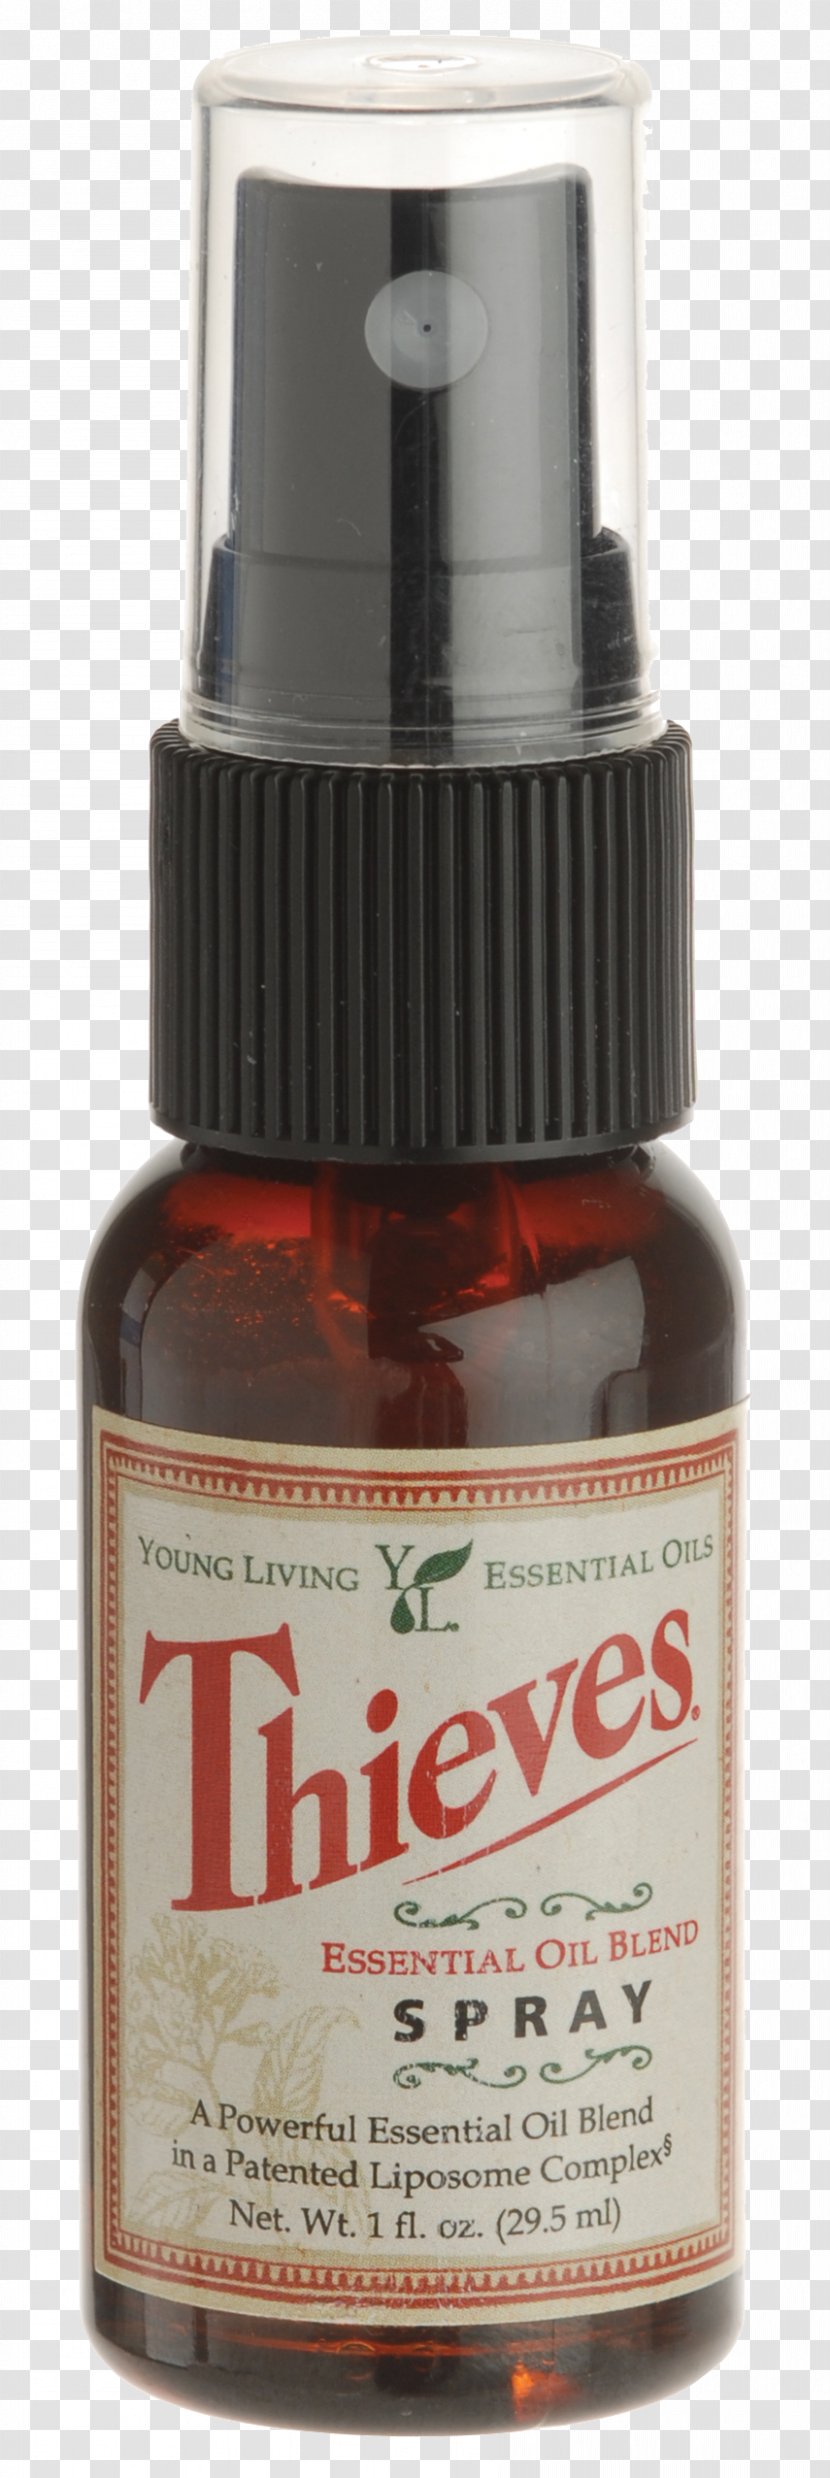 Young Living Malaysia Sdn Bhd Essential Oil Aerosol Spray Transparent PNG